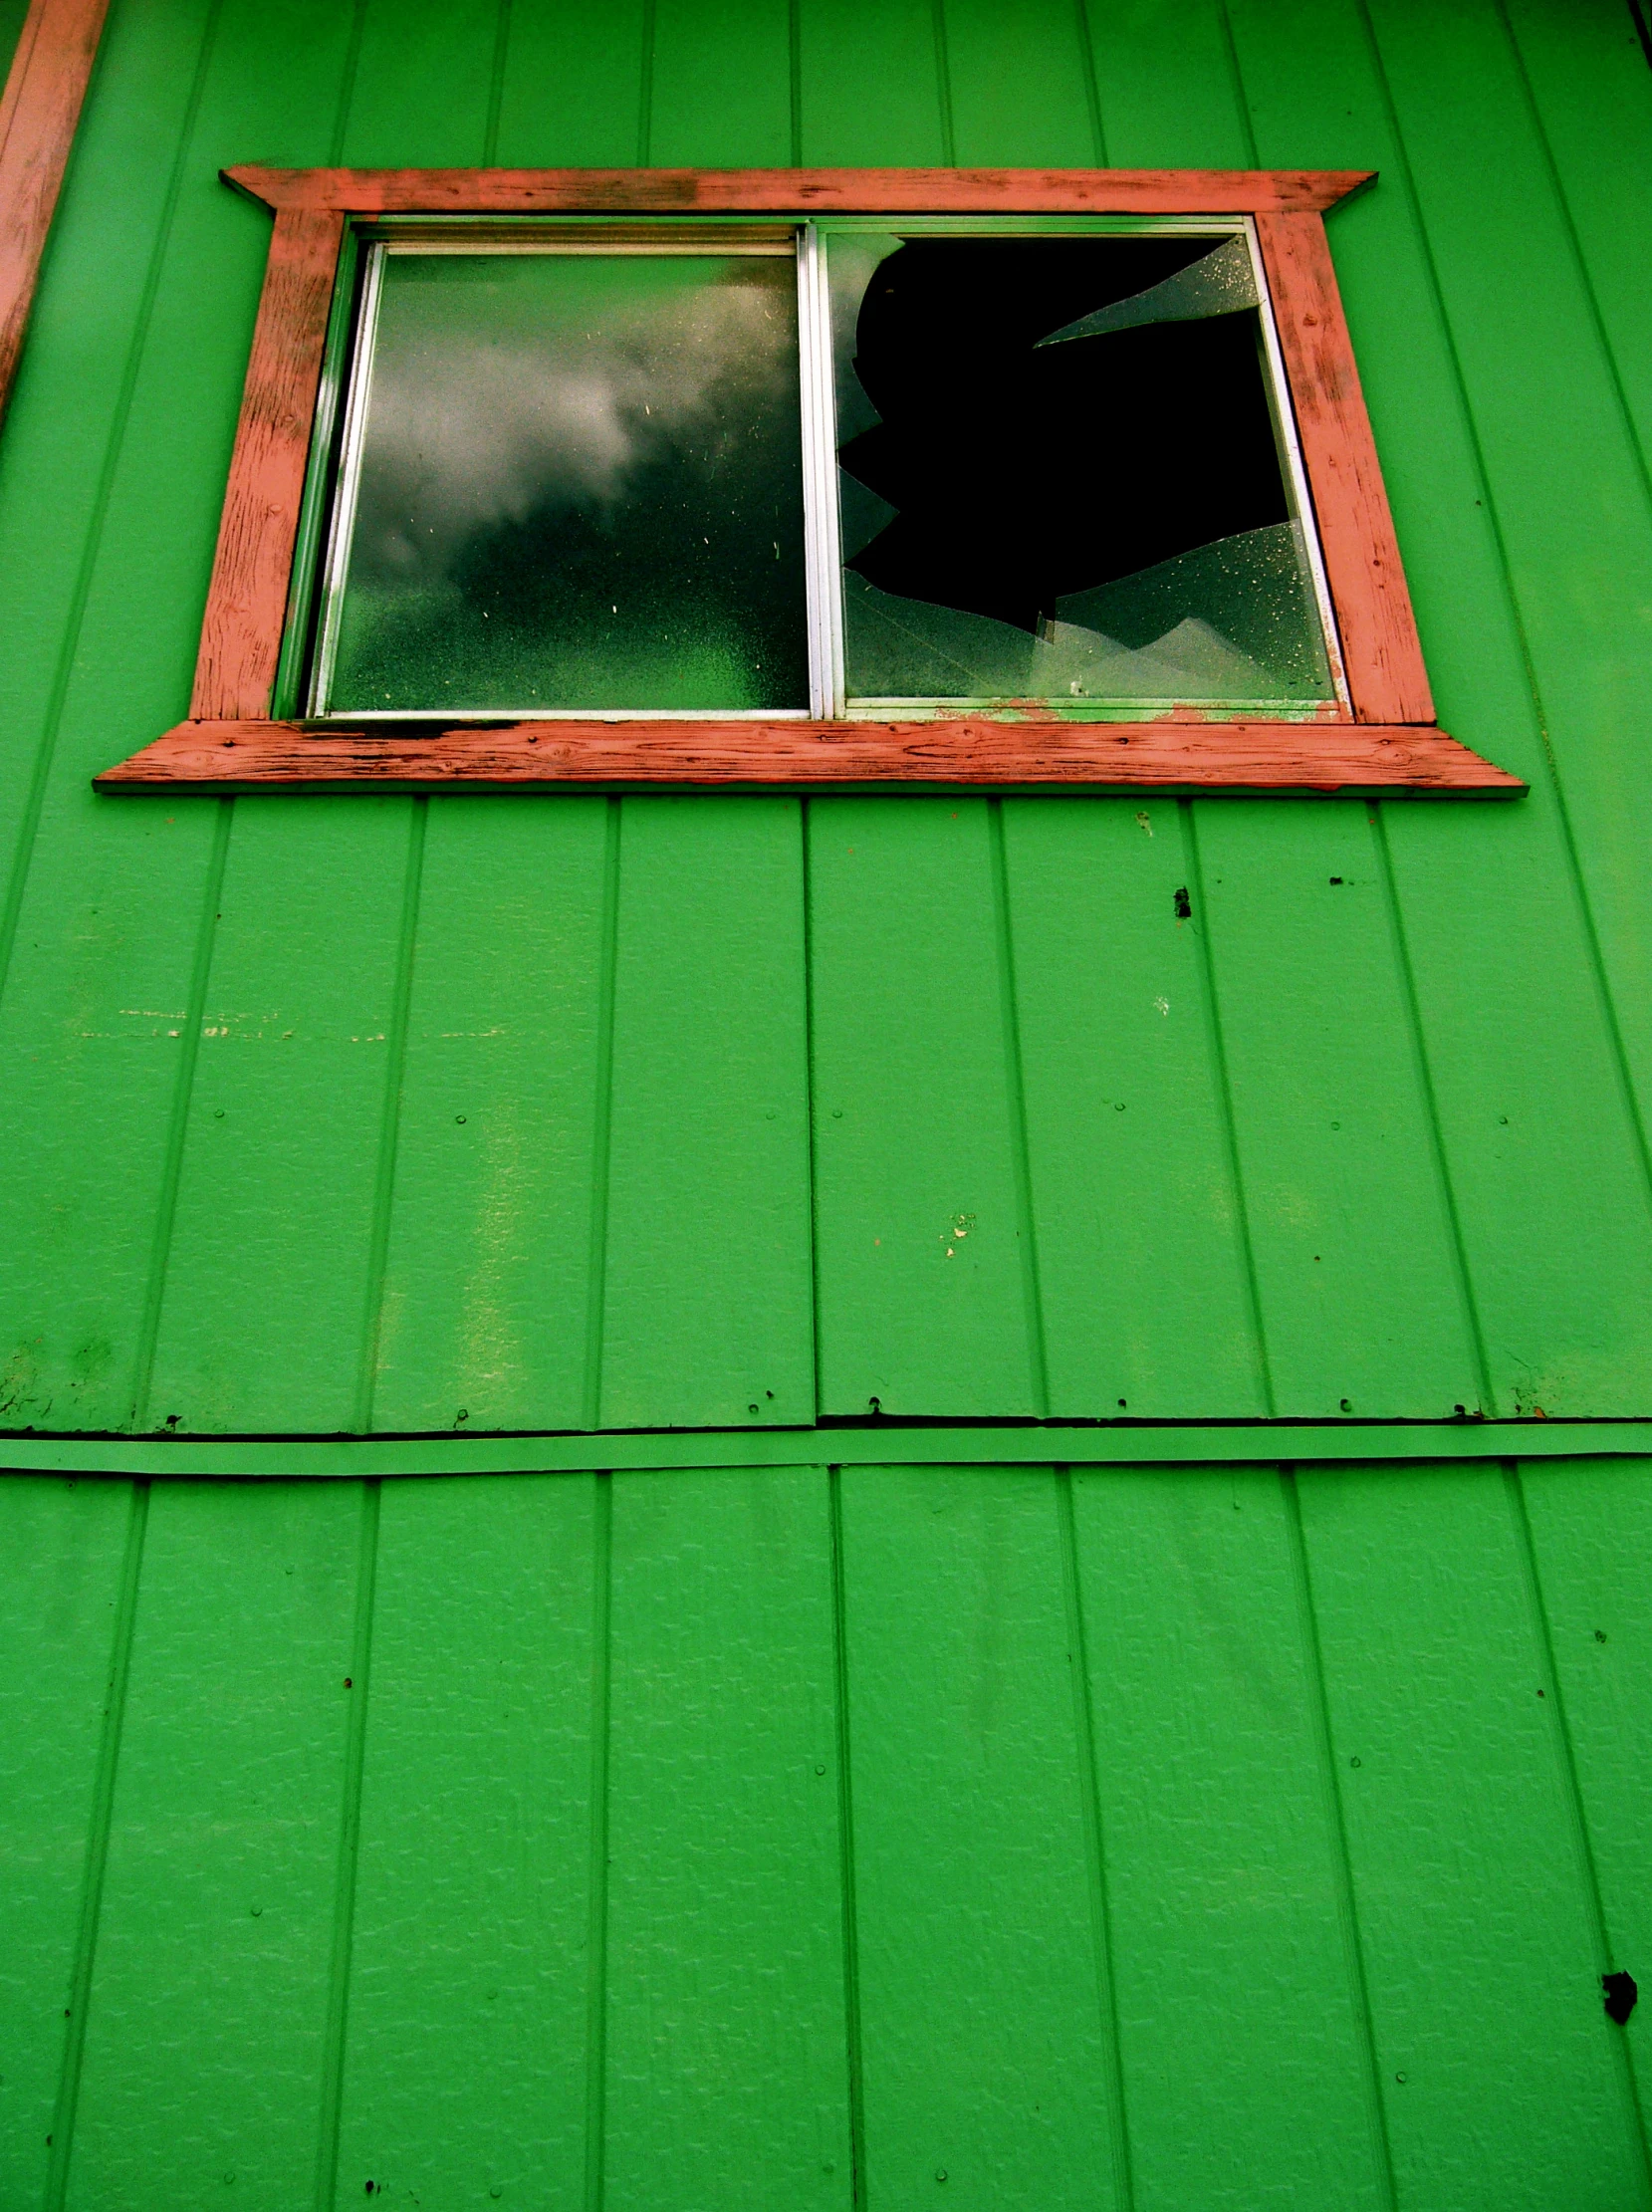 a green, tin - clad building with an open window